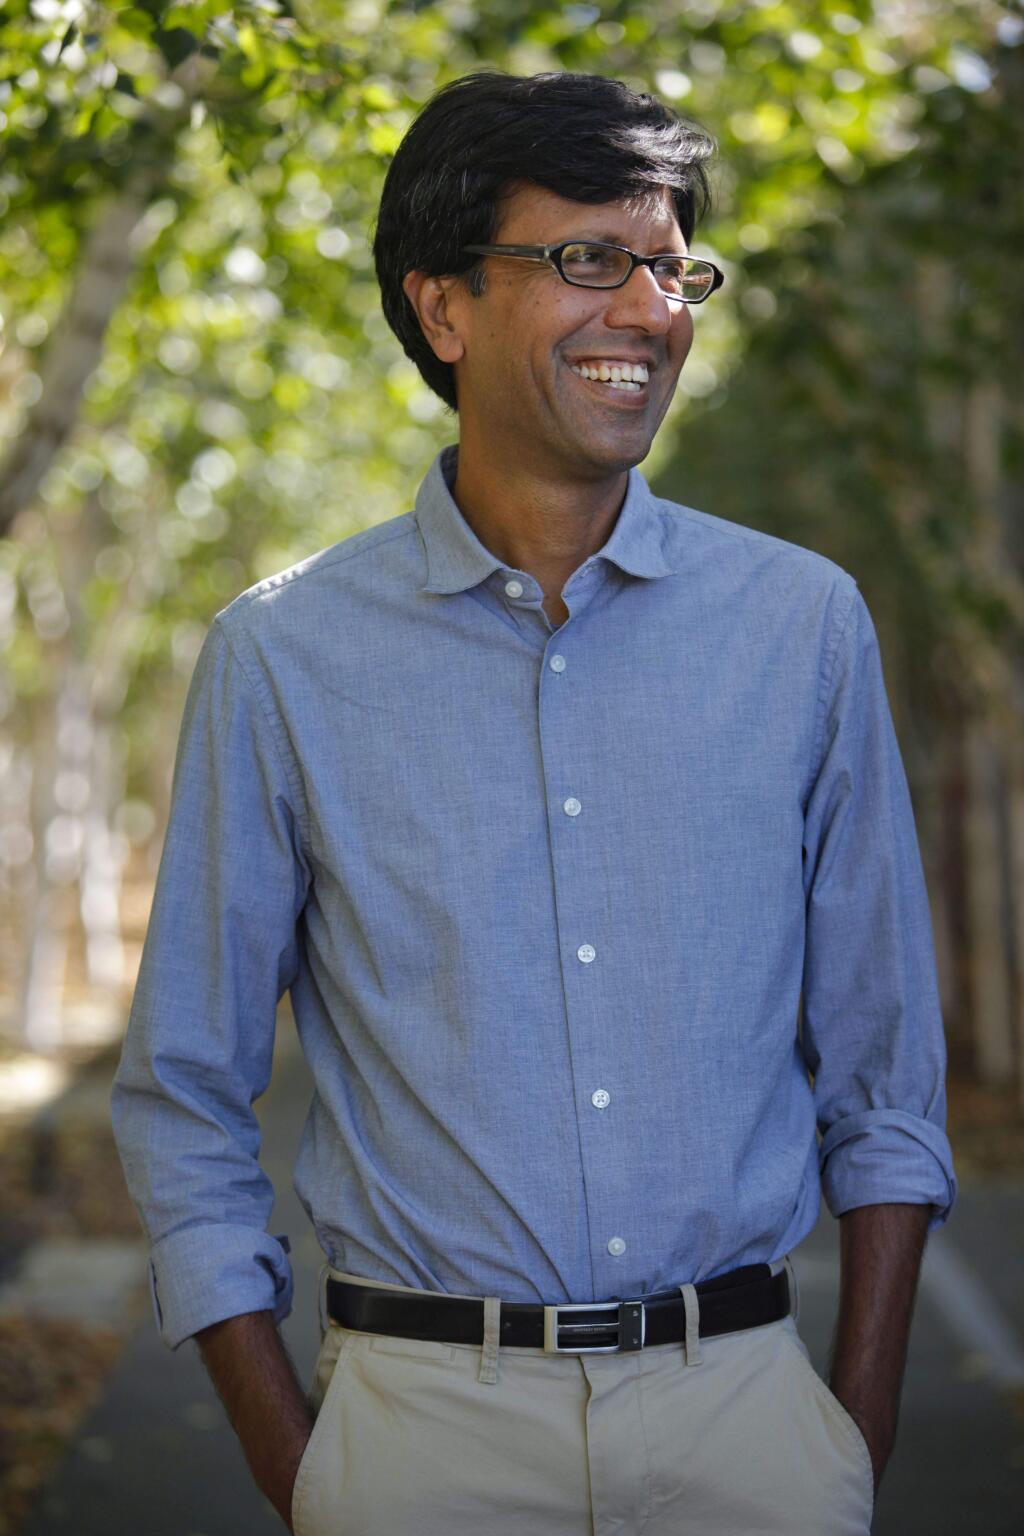 Aseem Das is the founder of World Centric which is located in the Foundry Wharf building near the Petaluma River. World Centric®'s mission is to provide sustainable products to replace single-use plastic items such as straws. Their disposable foodservice products are designed to compost.(CRISSY PASCUAL/ARGUS-COURIER STAFF)